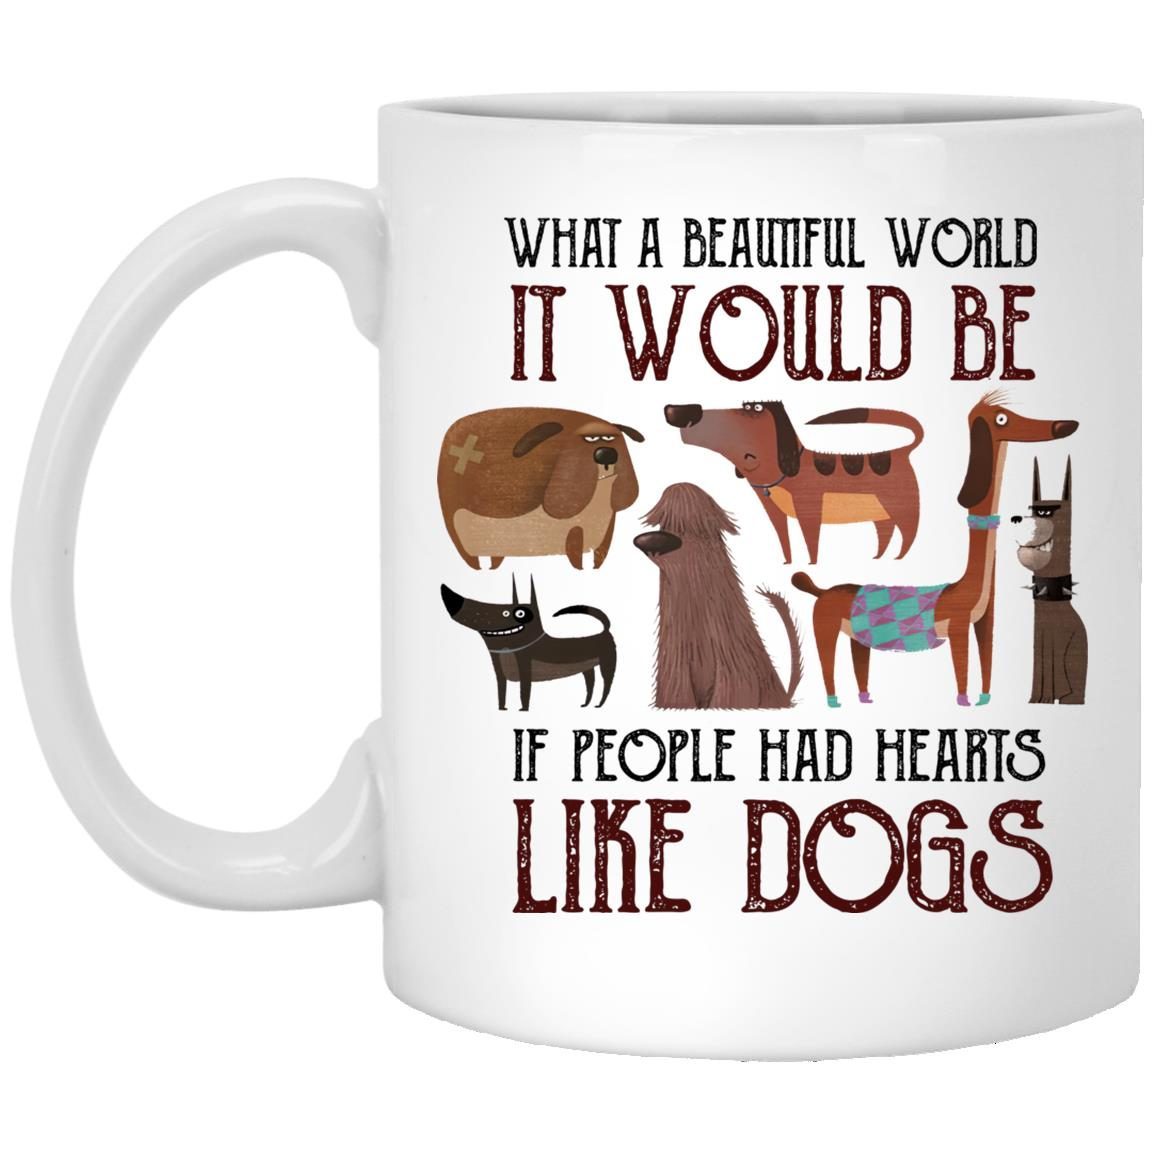 What A Beautiful World It Would Be If People Had Hearts Like Dogs shirt 1